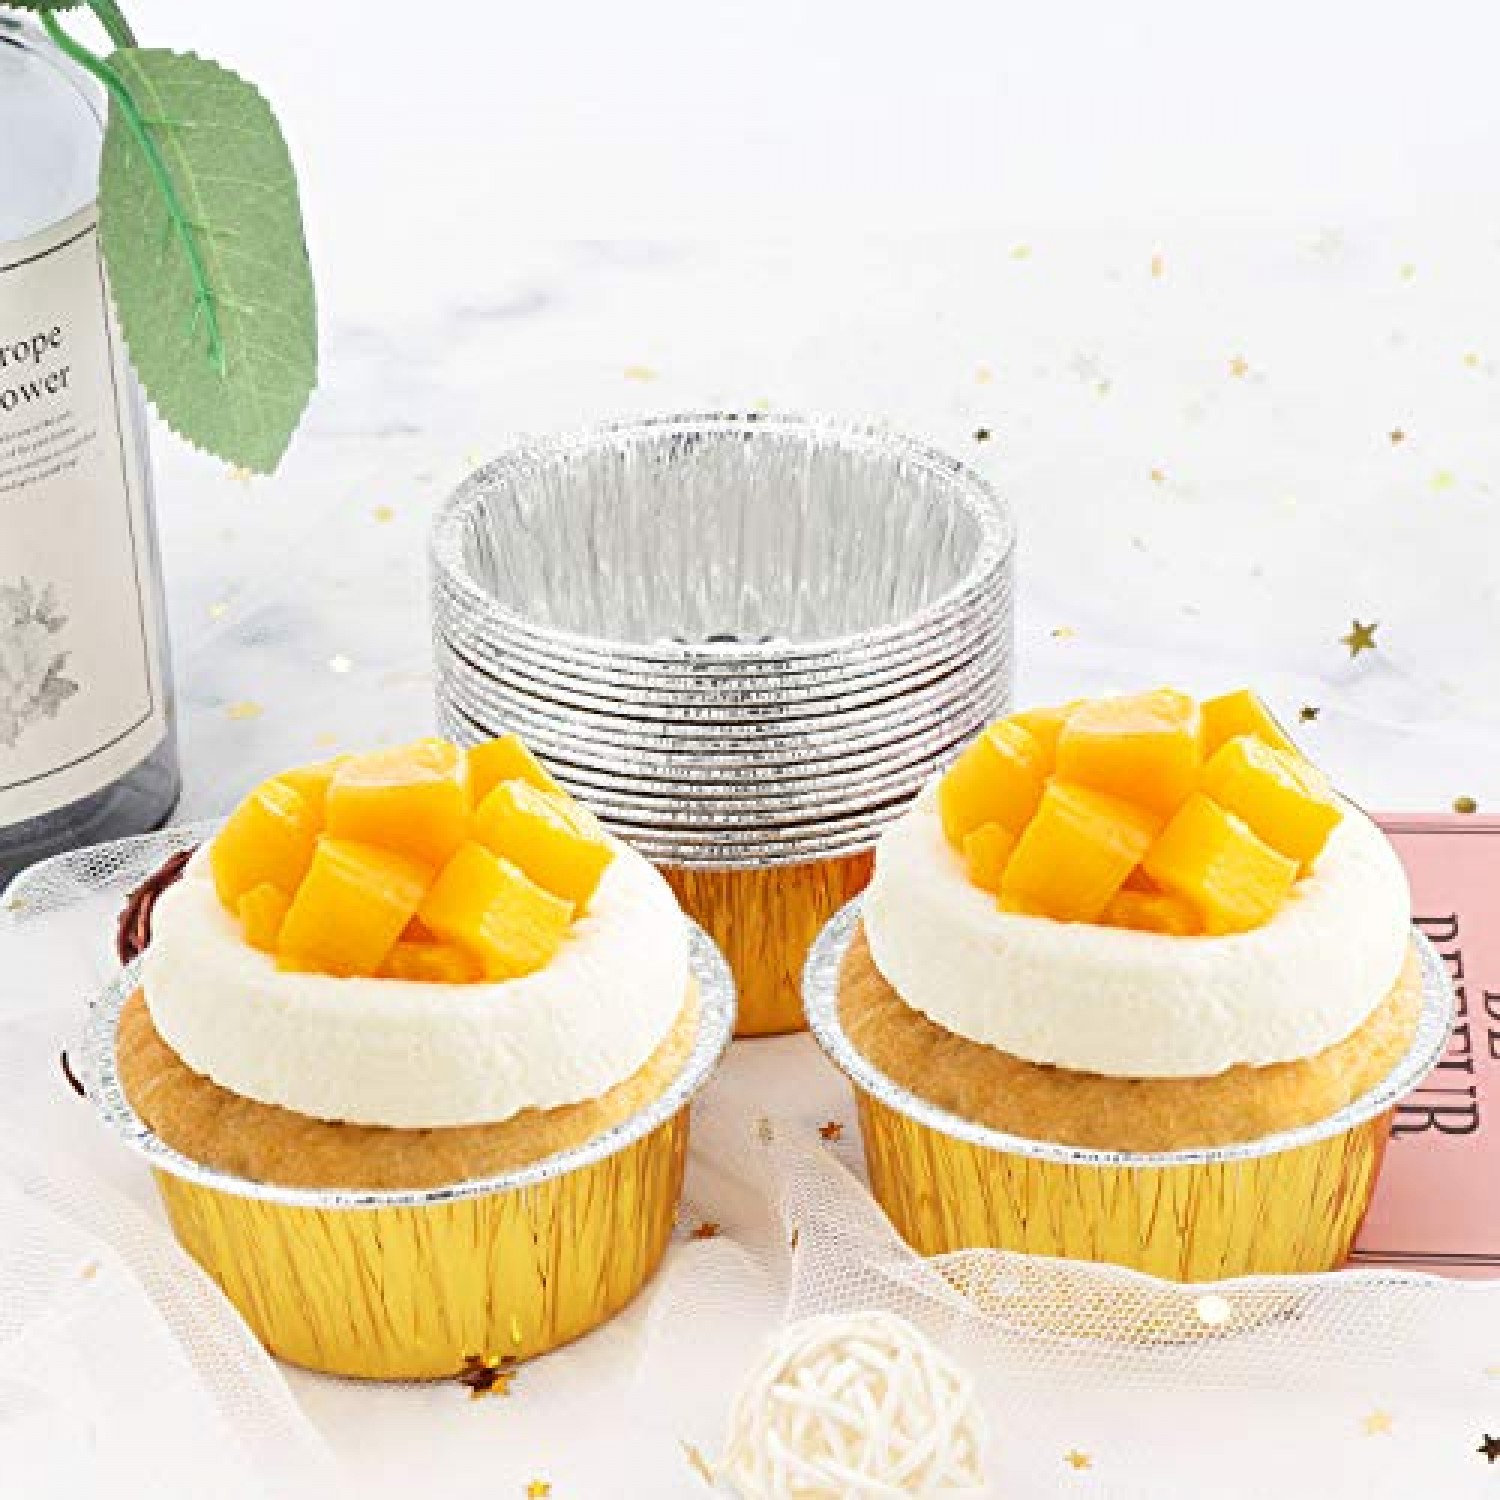 200 Pack Aluminum Foil Cupcake Baking Cups 5oz Cupcake Liners Dessert Cups  with Lids Disposable Cupcake Cups Mini Cake Containers Flan Molds Tin Mini